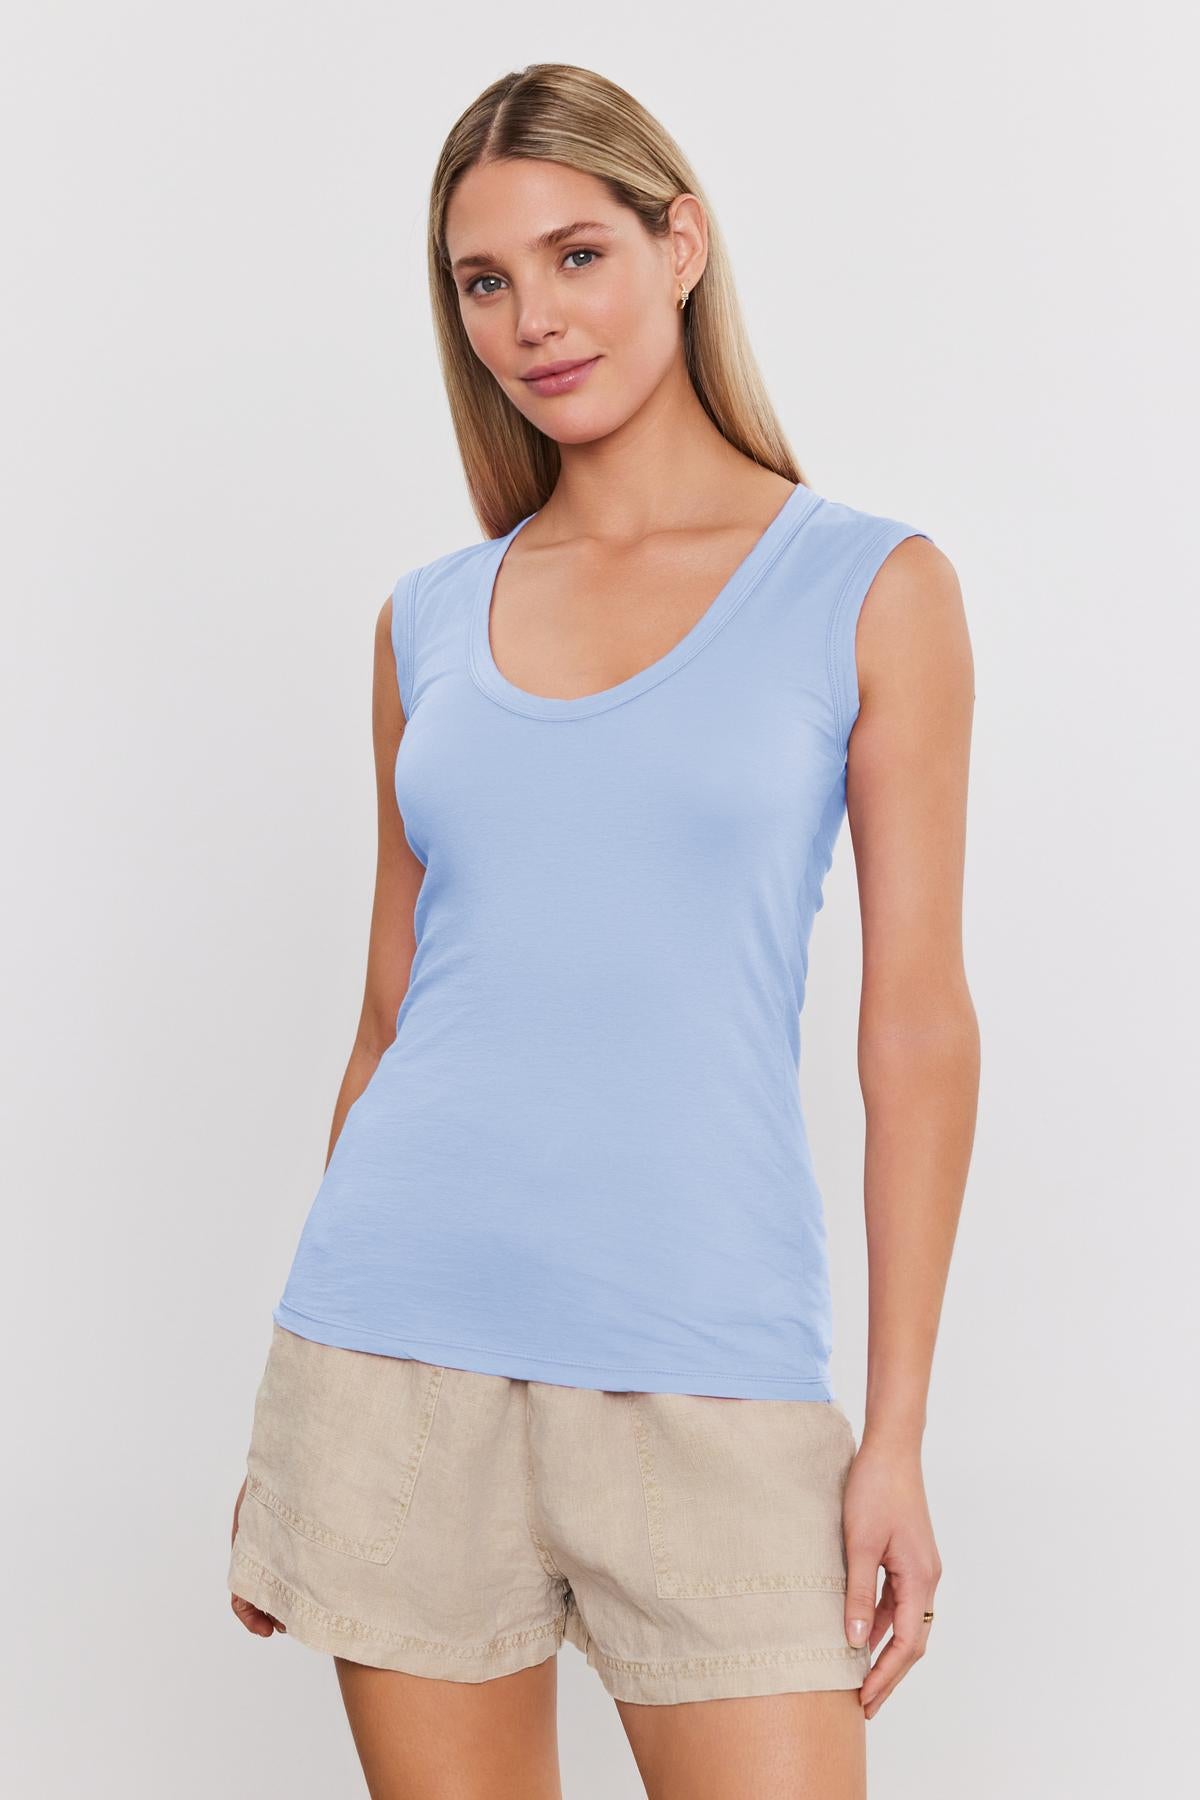 Woman in an ESTINA TANK TOP by Velvet by Graham & Spencer and beige shorts stands against a plain white background, looking at the camera with a neutral expression.-36752924115137